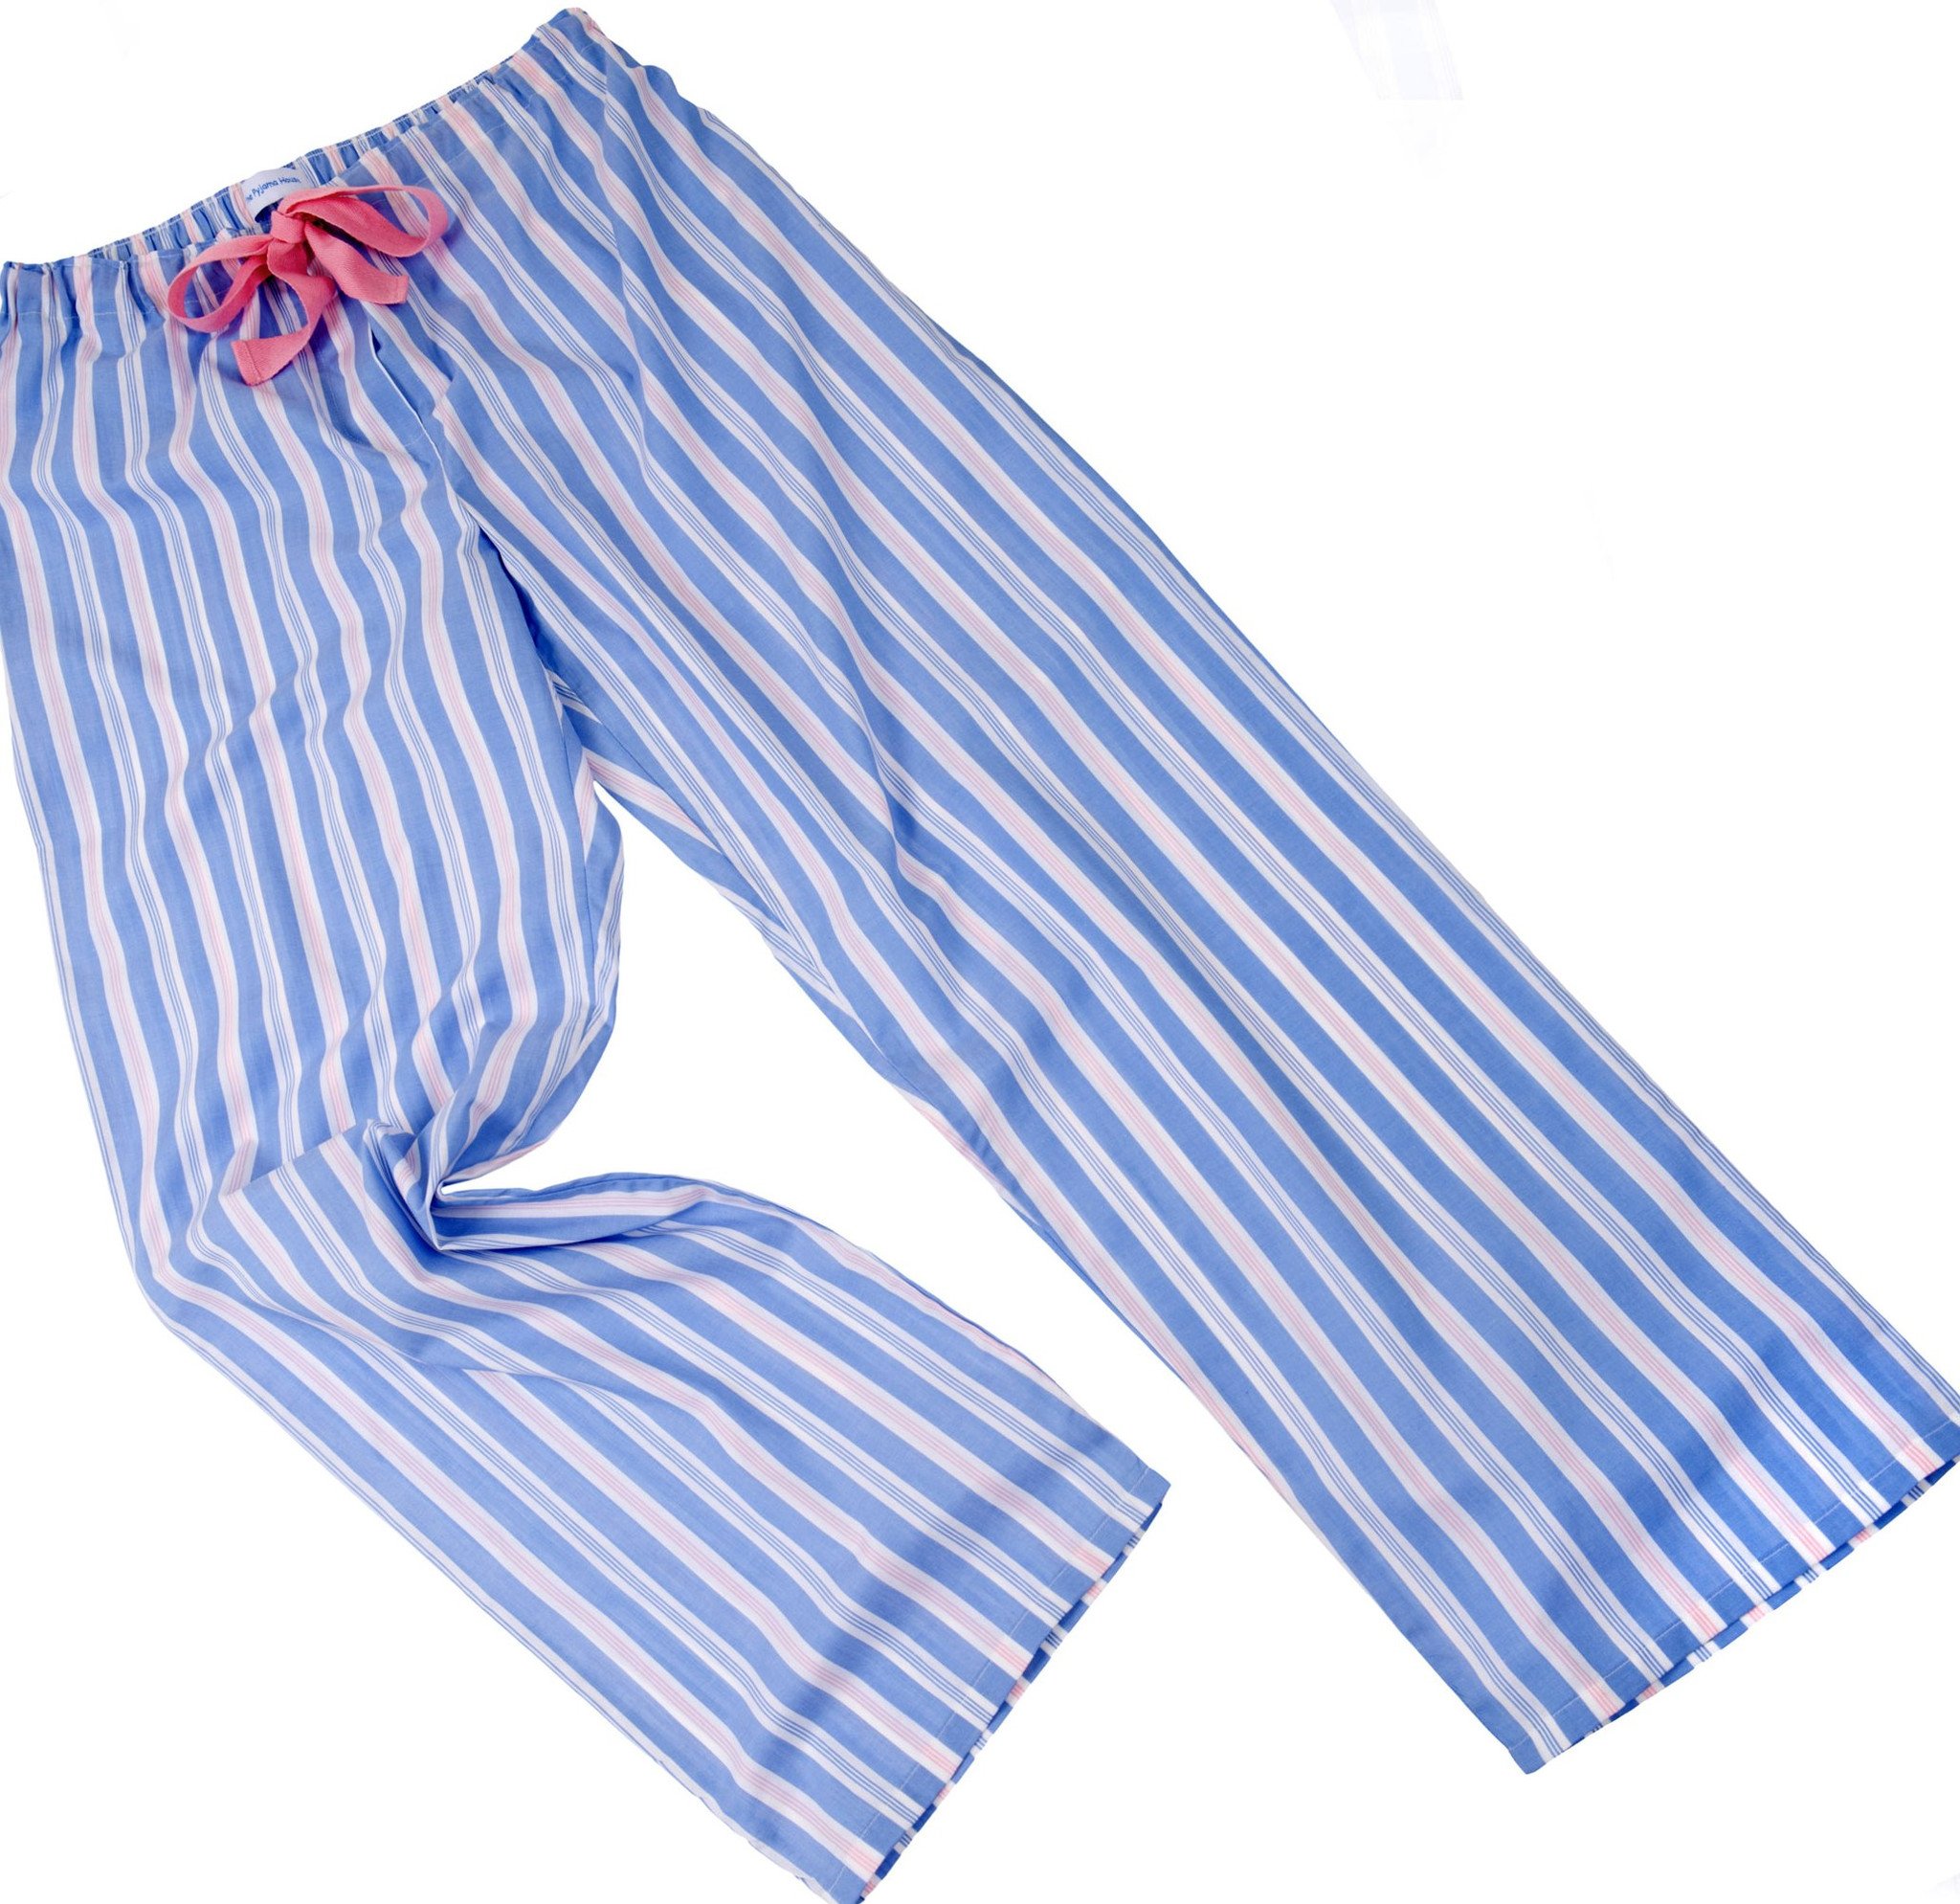 Pale blue and pink stripe cotton pyjama bottoms with pink tie